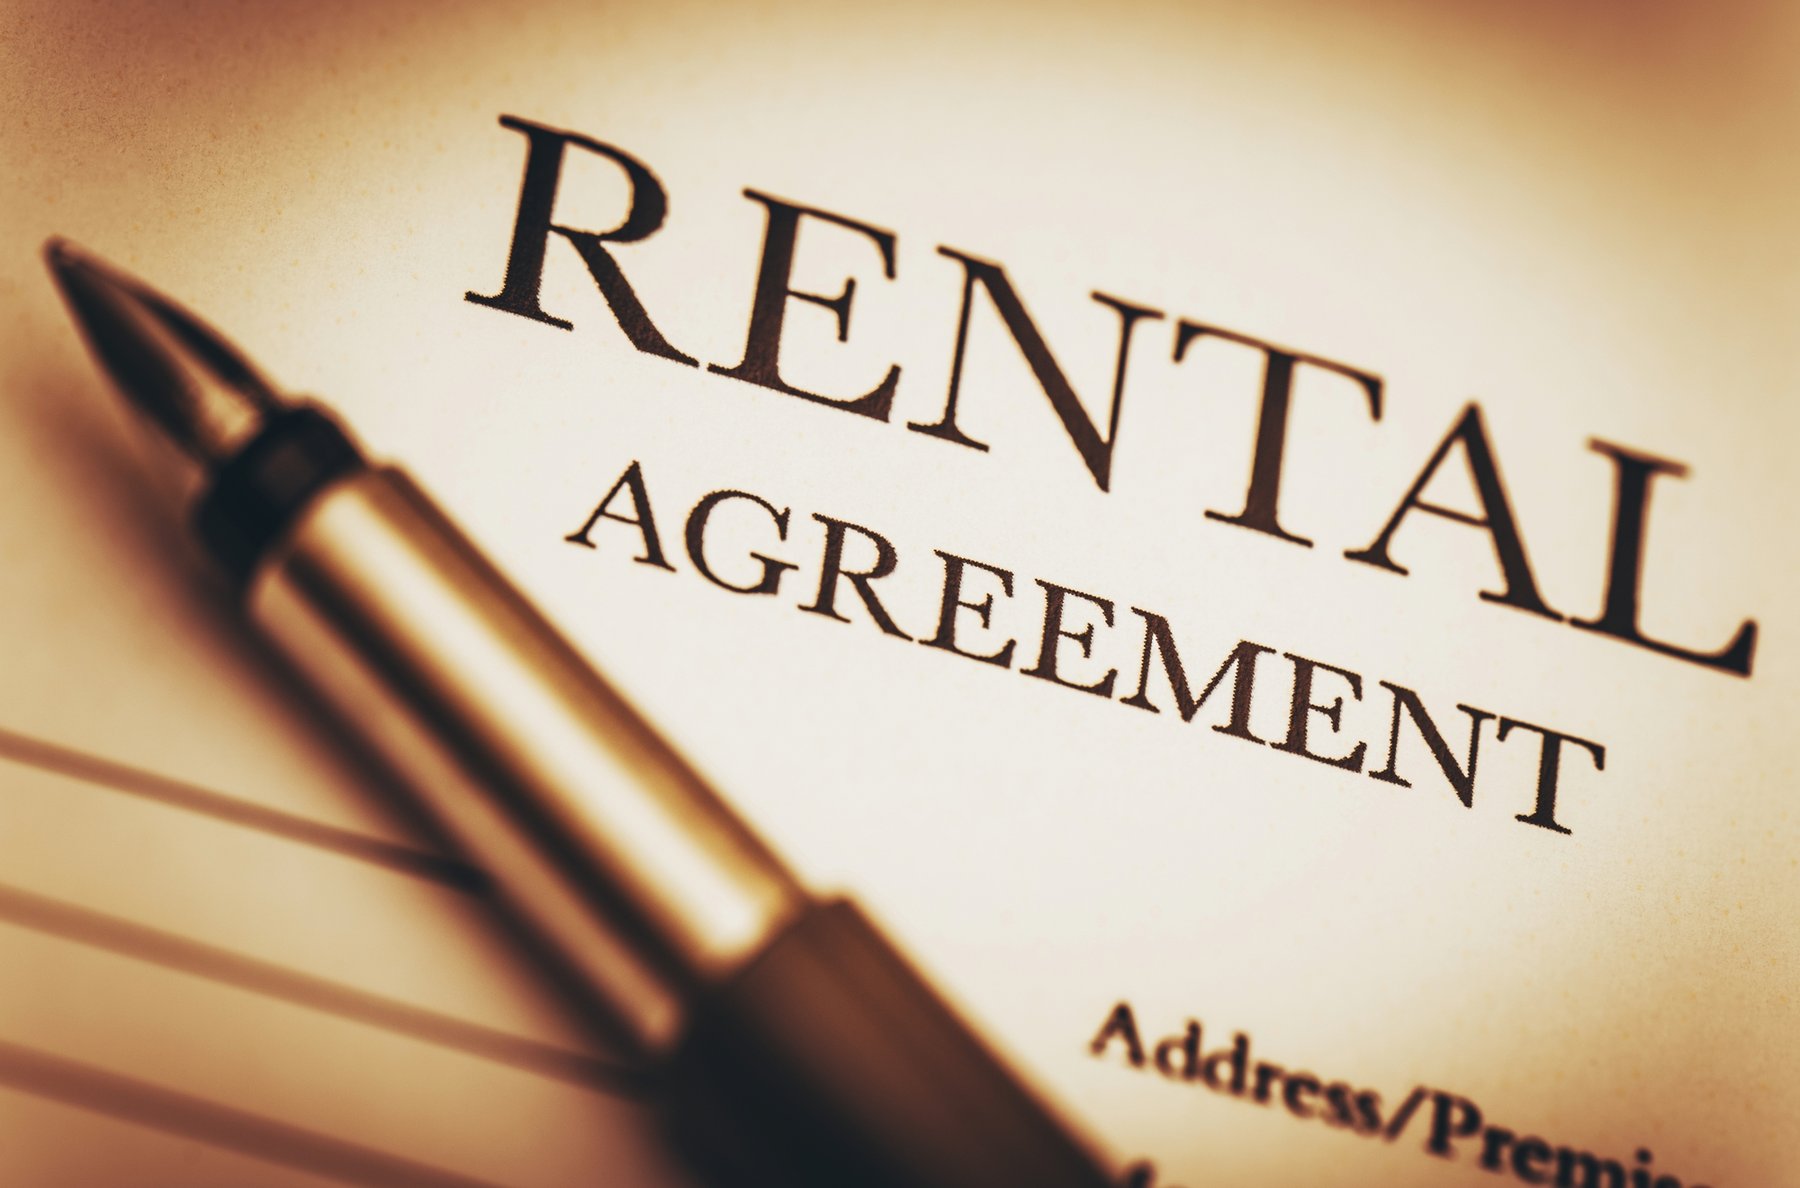 Rental Agreement. Agreement Footage. Agreement PSD. Rent more